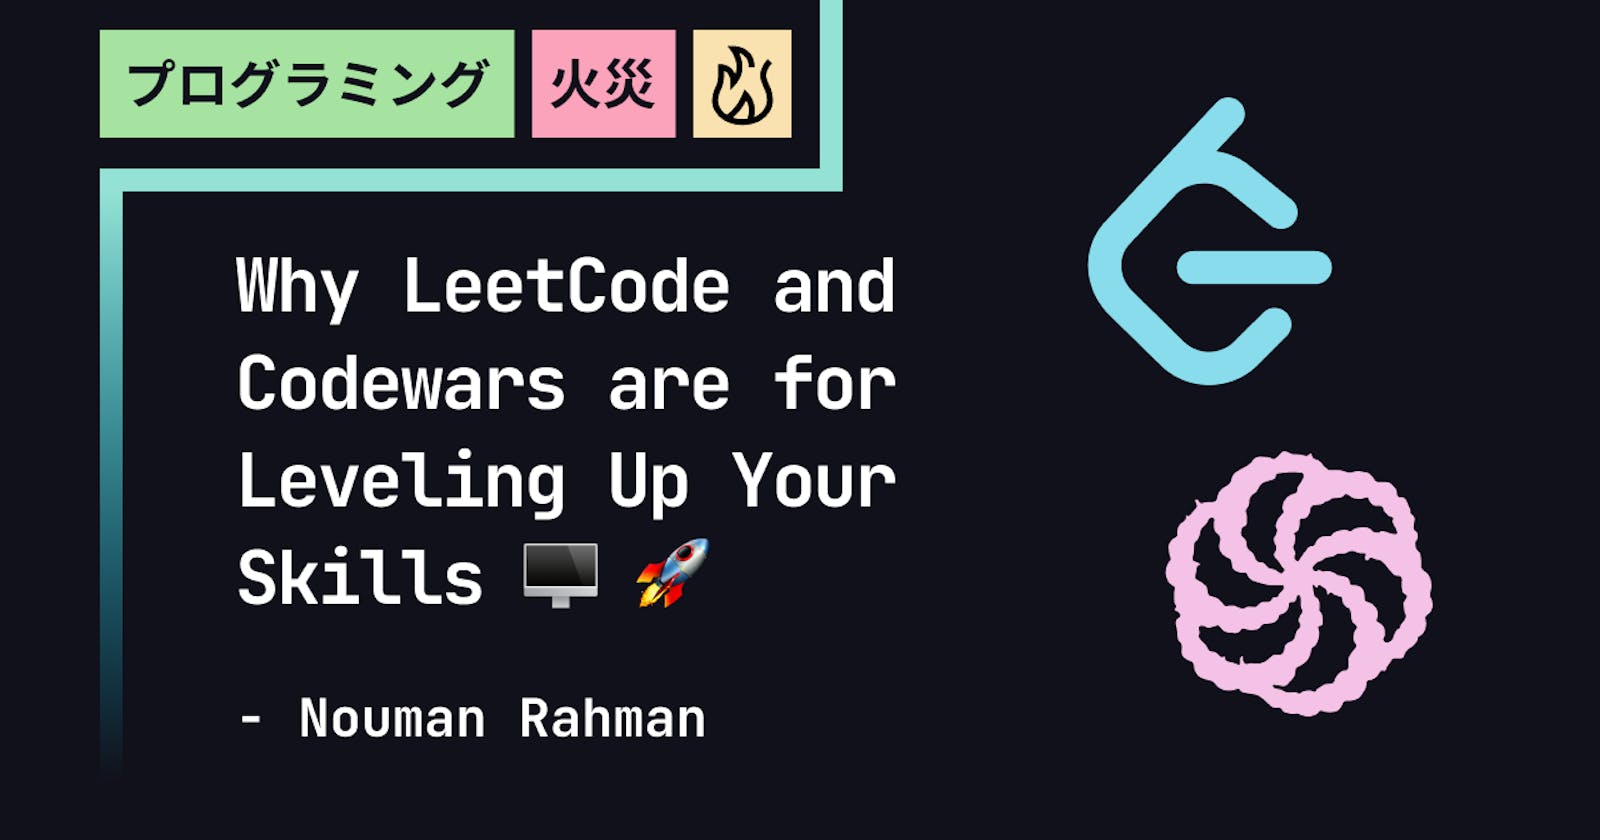 Why LeetCode and Codewars are Essential for Leveling Up Your Skills